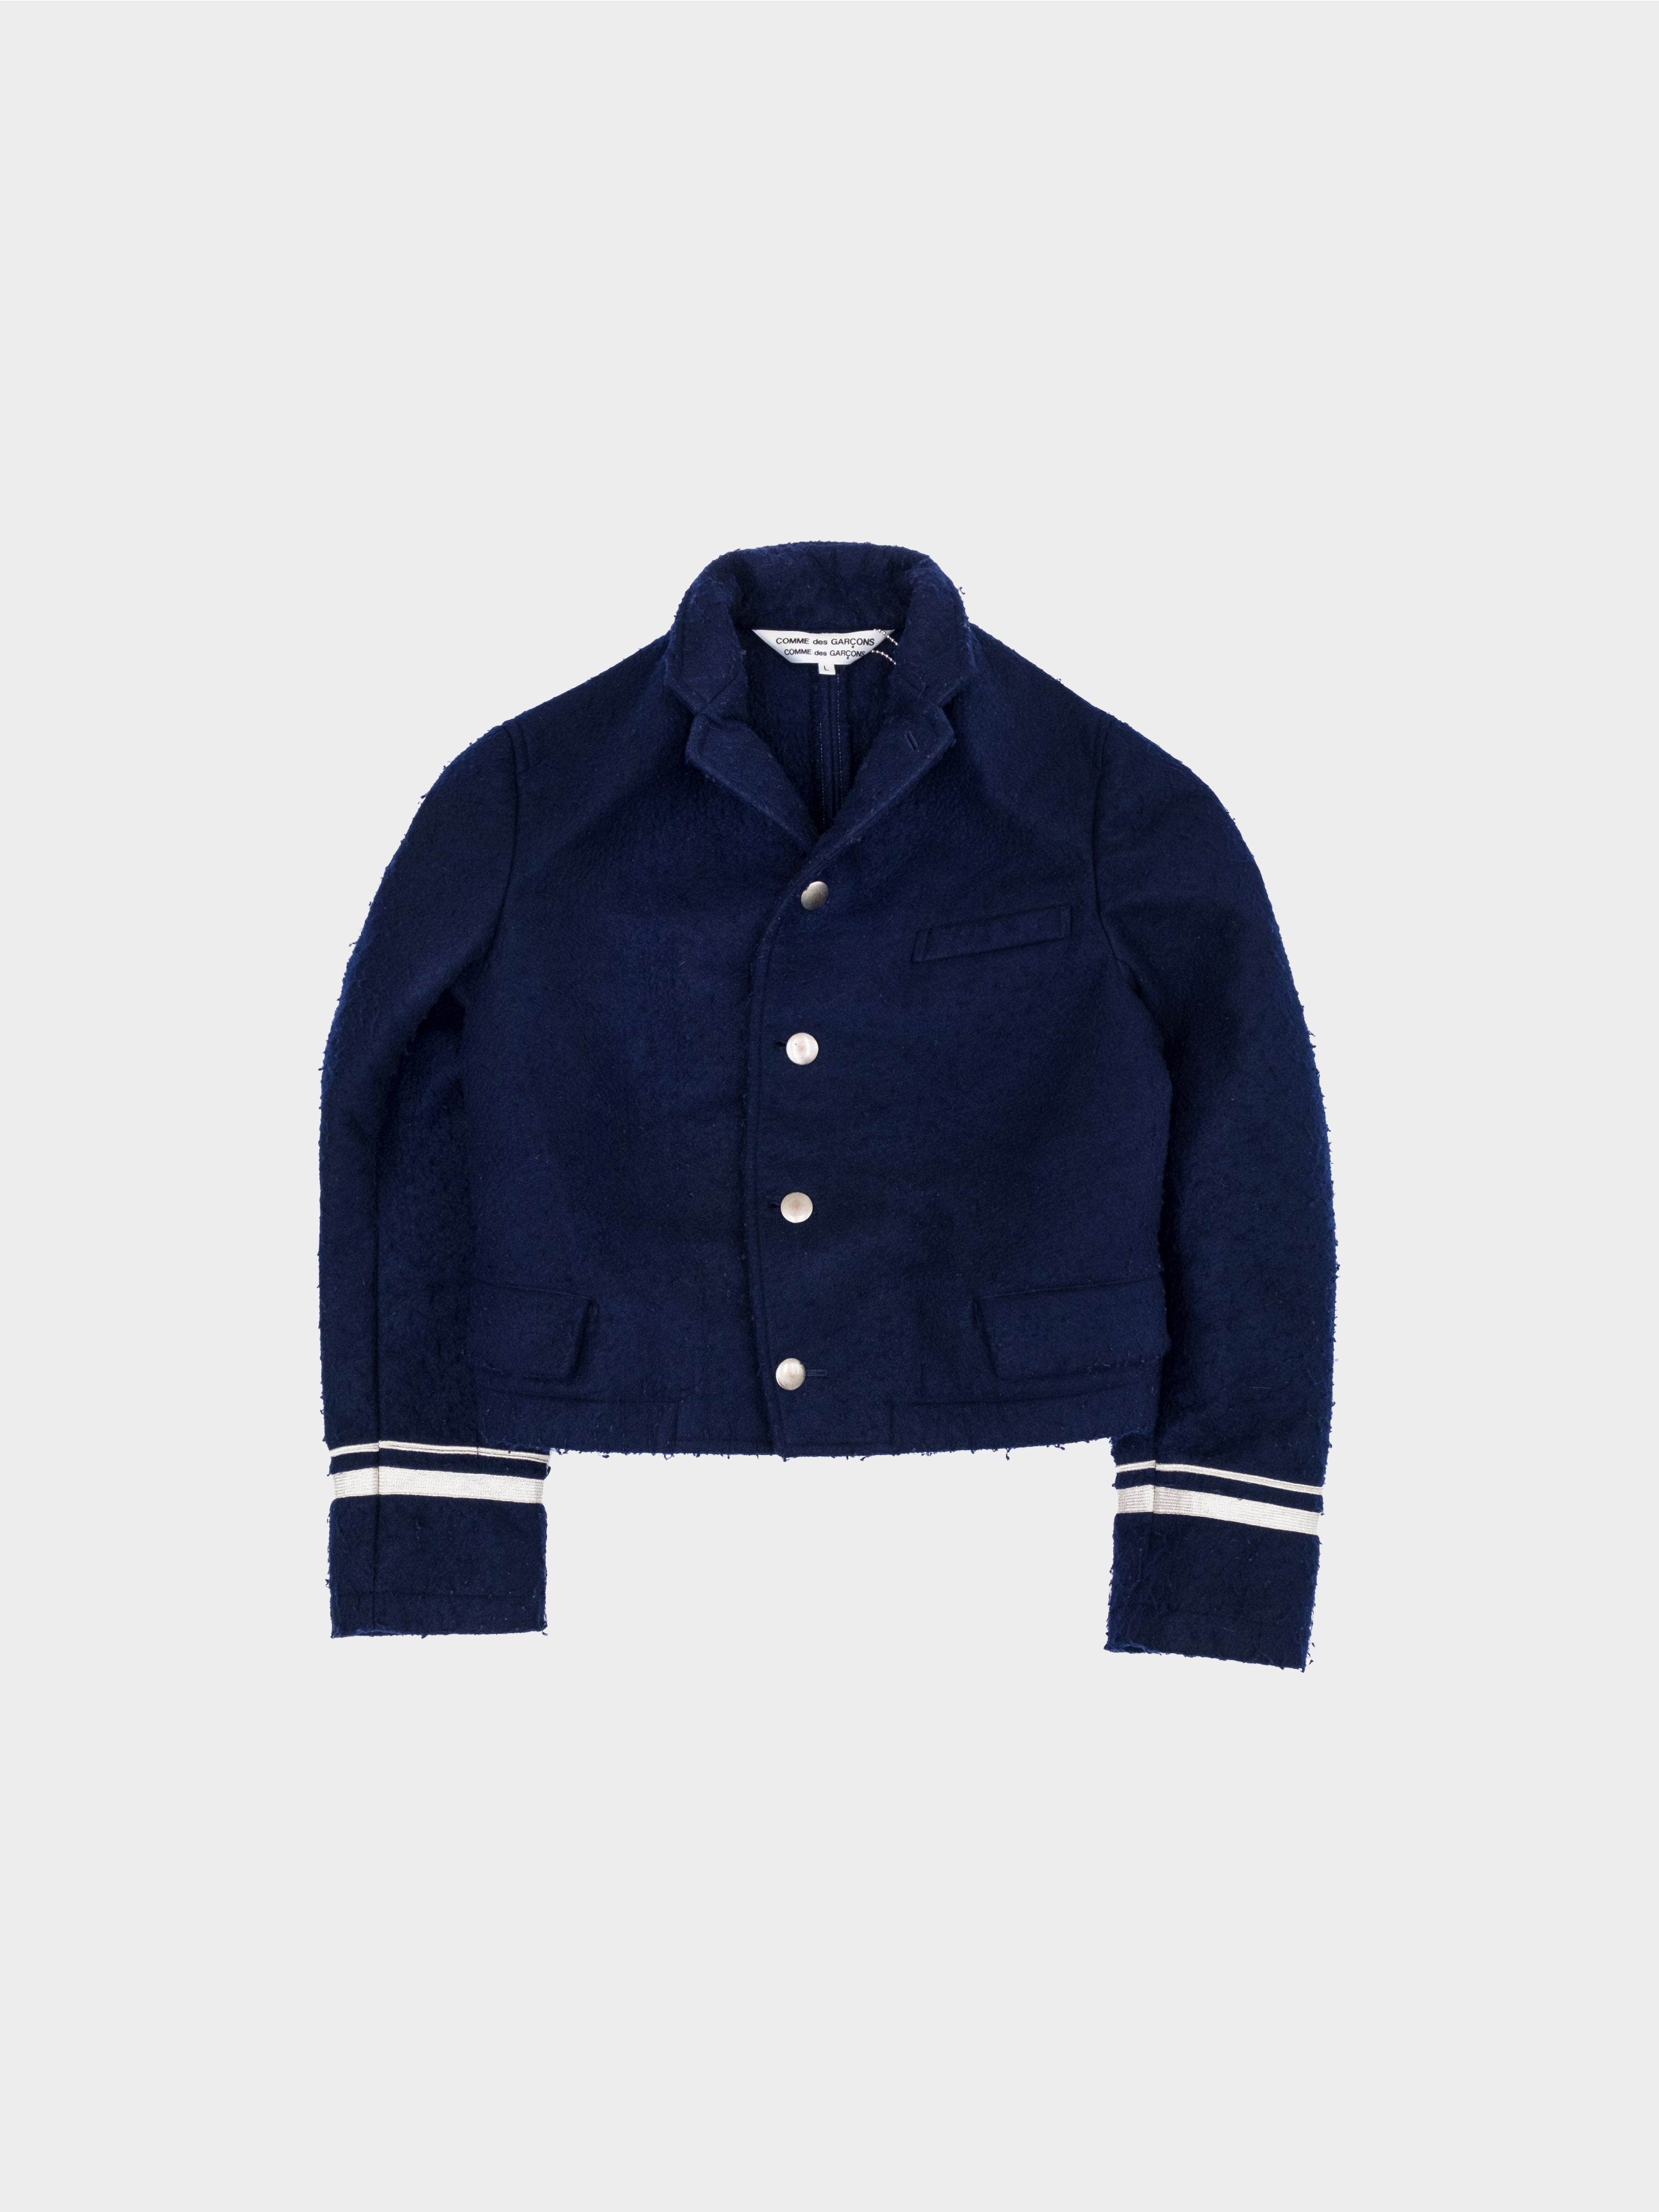 Comme des Garçons 2007 Navy Wool Blazer with Piping